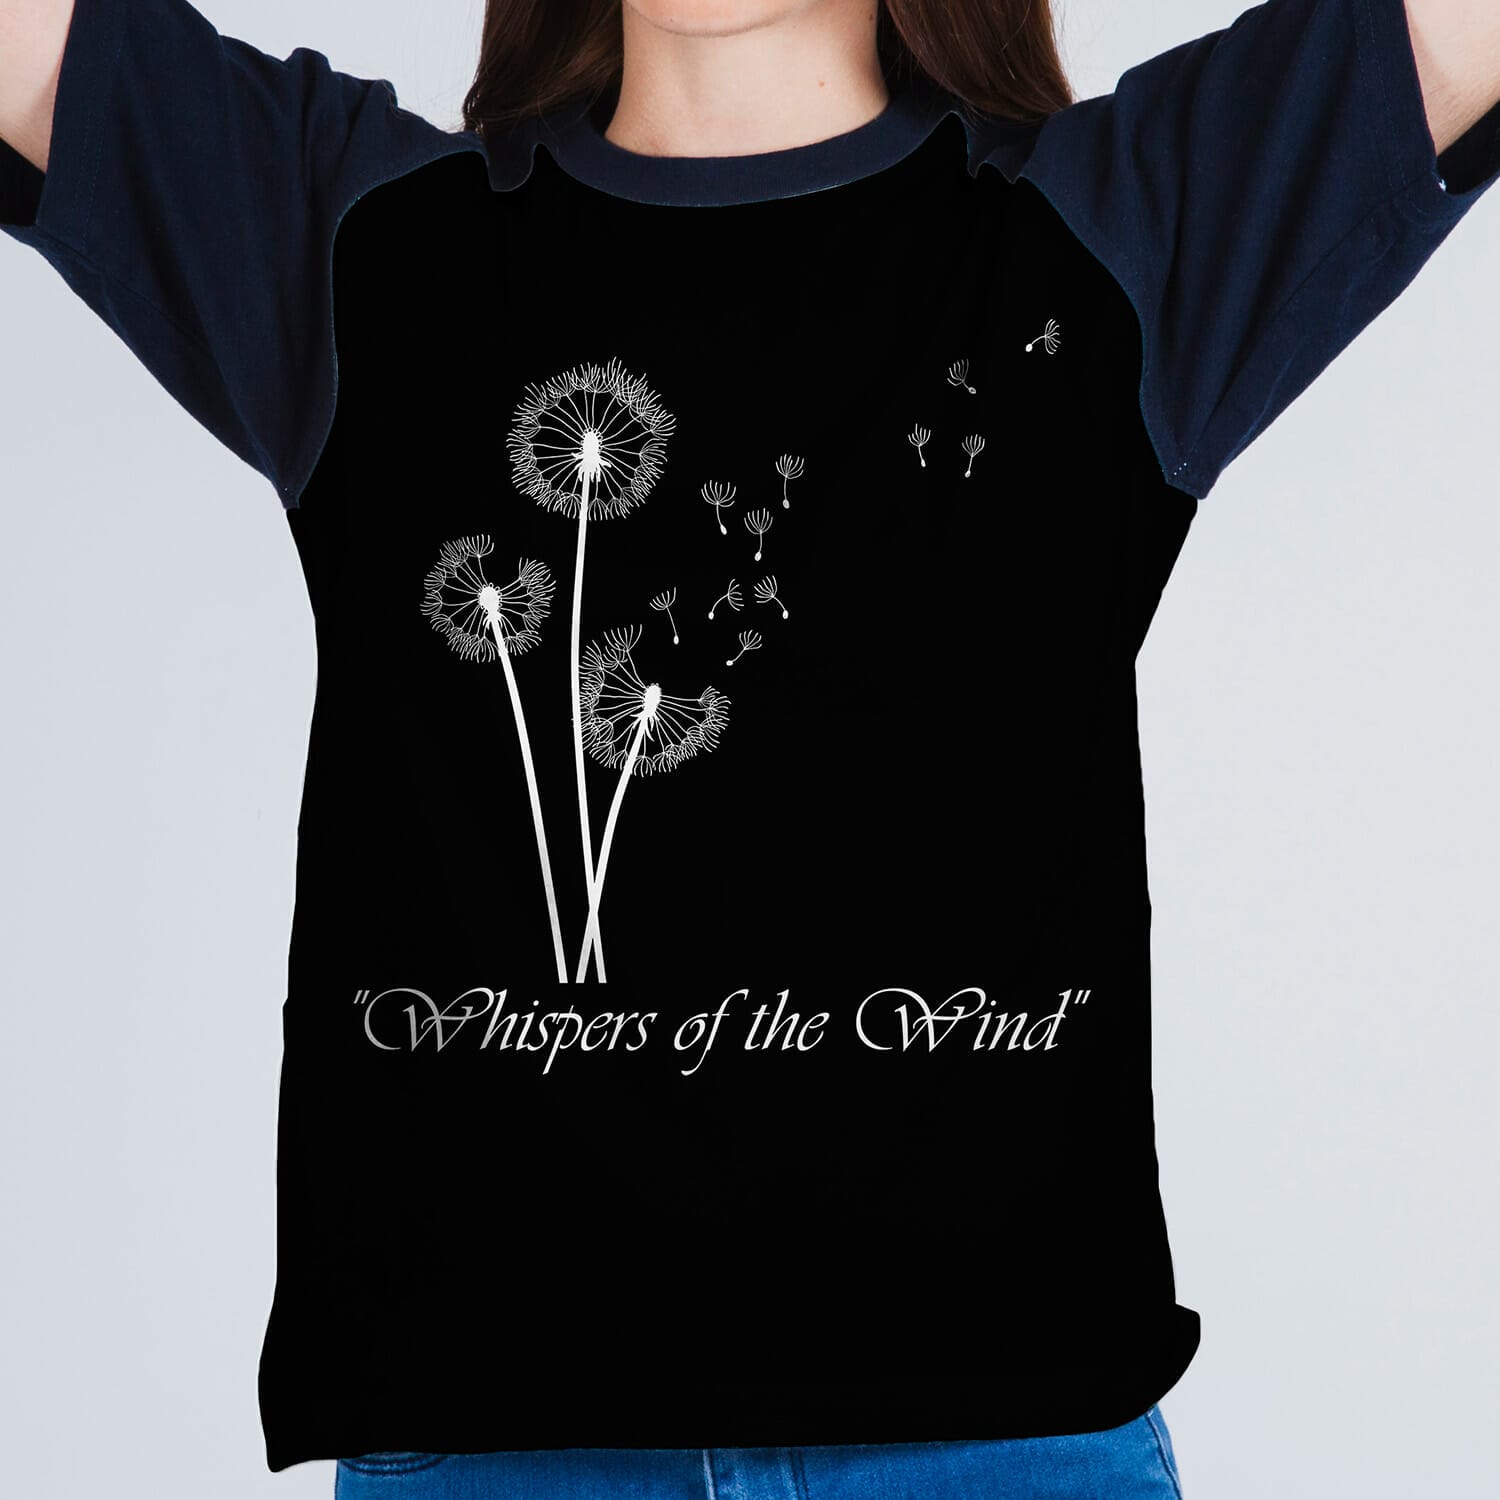 Whispers of the Winds Dandelions Tshirt design